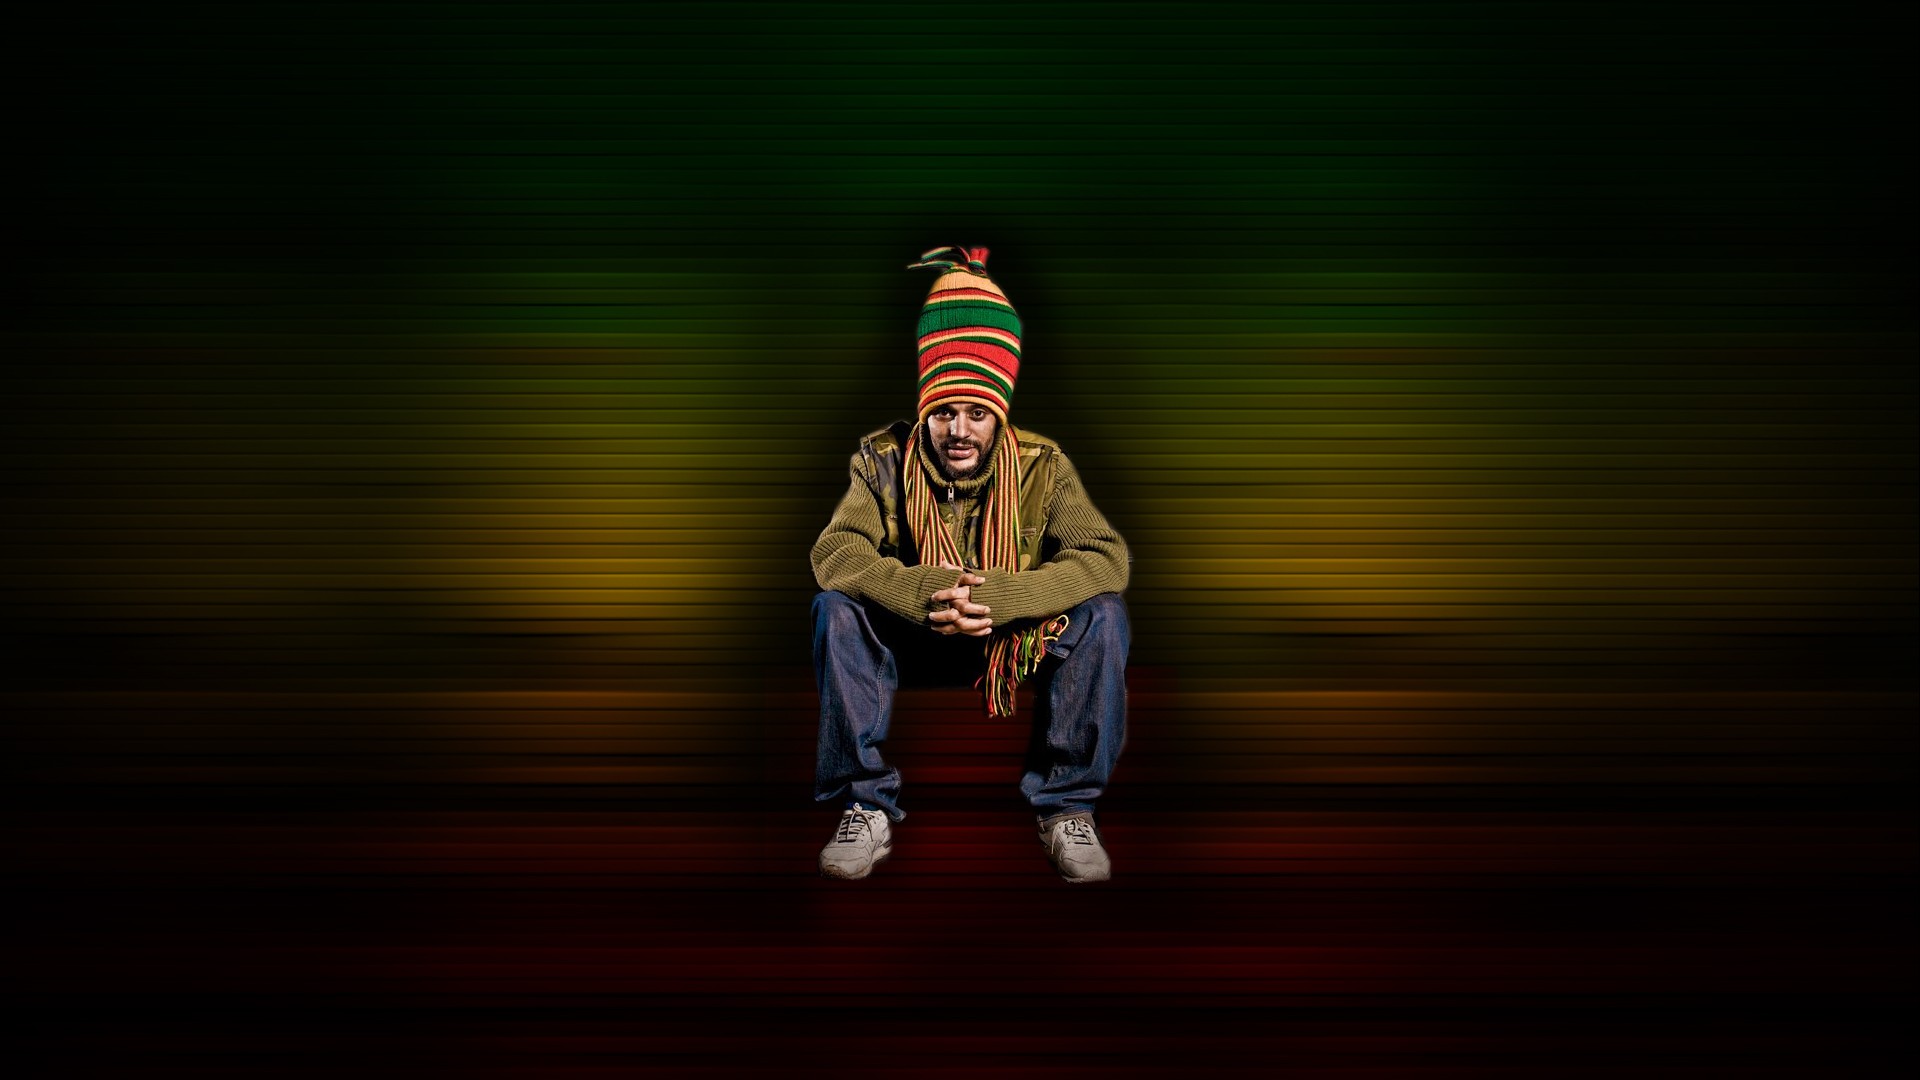 Snow Reggae Backgrounds - Bing images